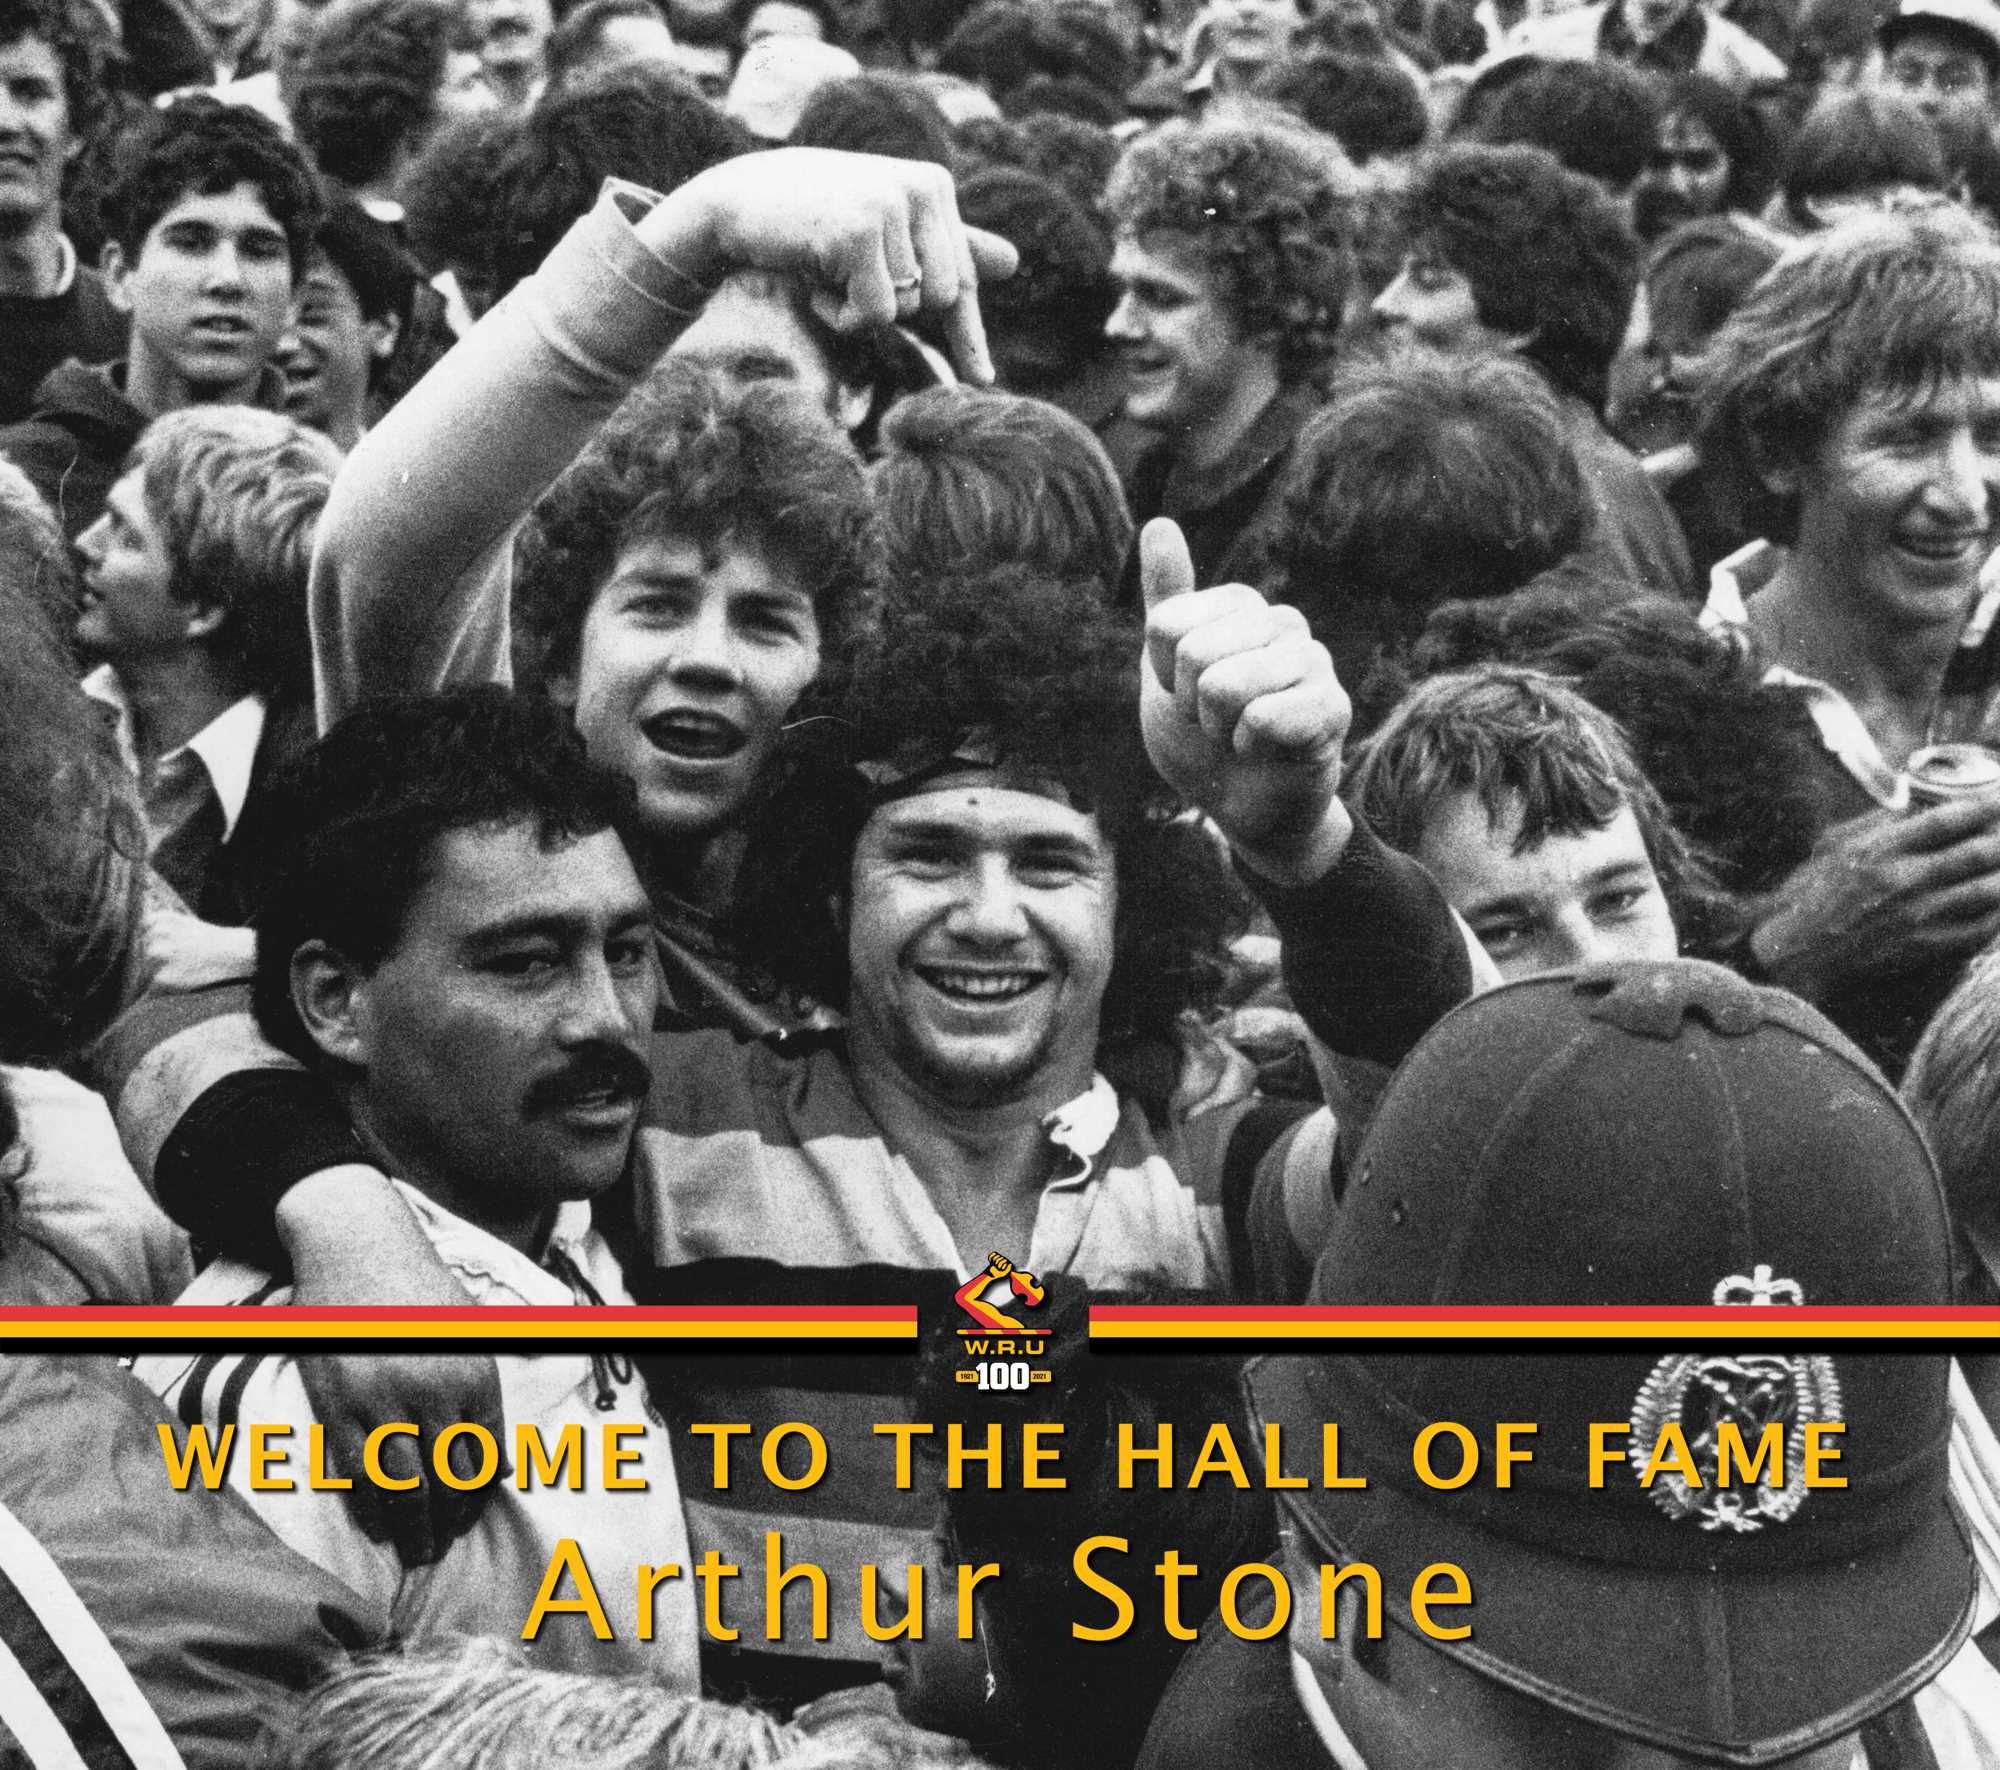 Arthur Stone inducted into Waikato Rugby Hall of Fame.